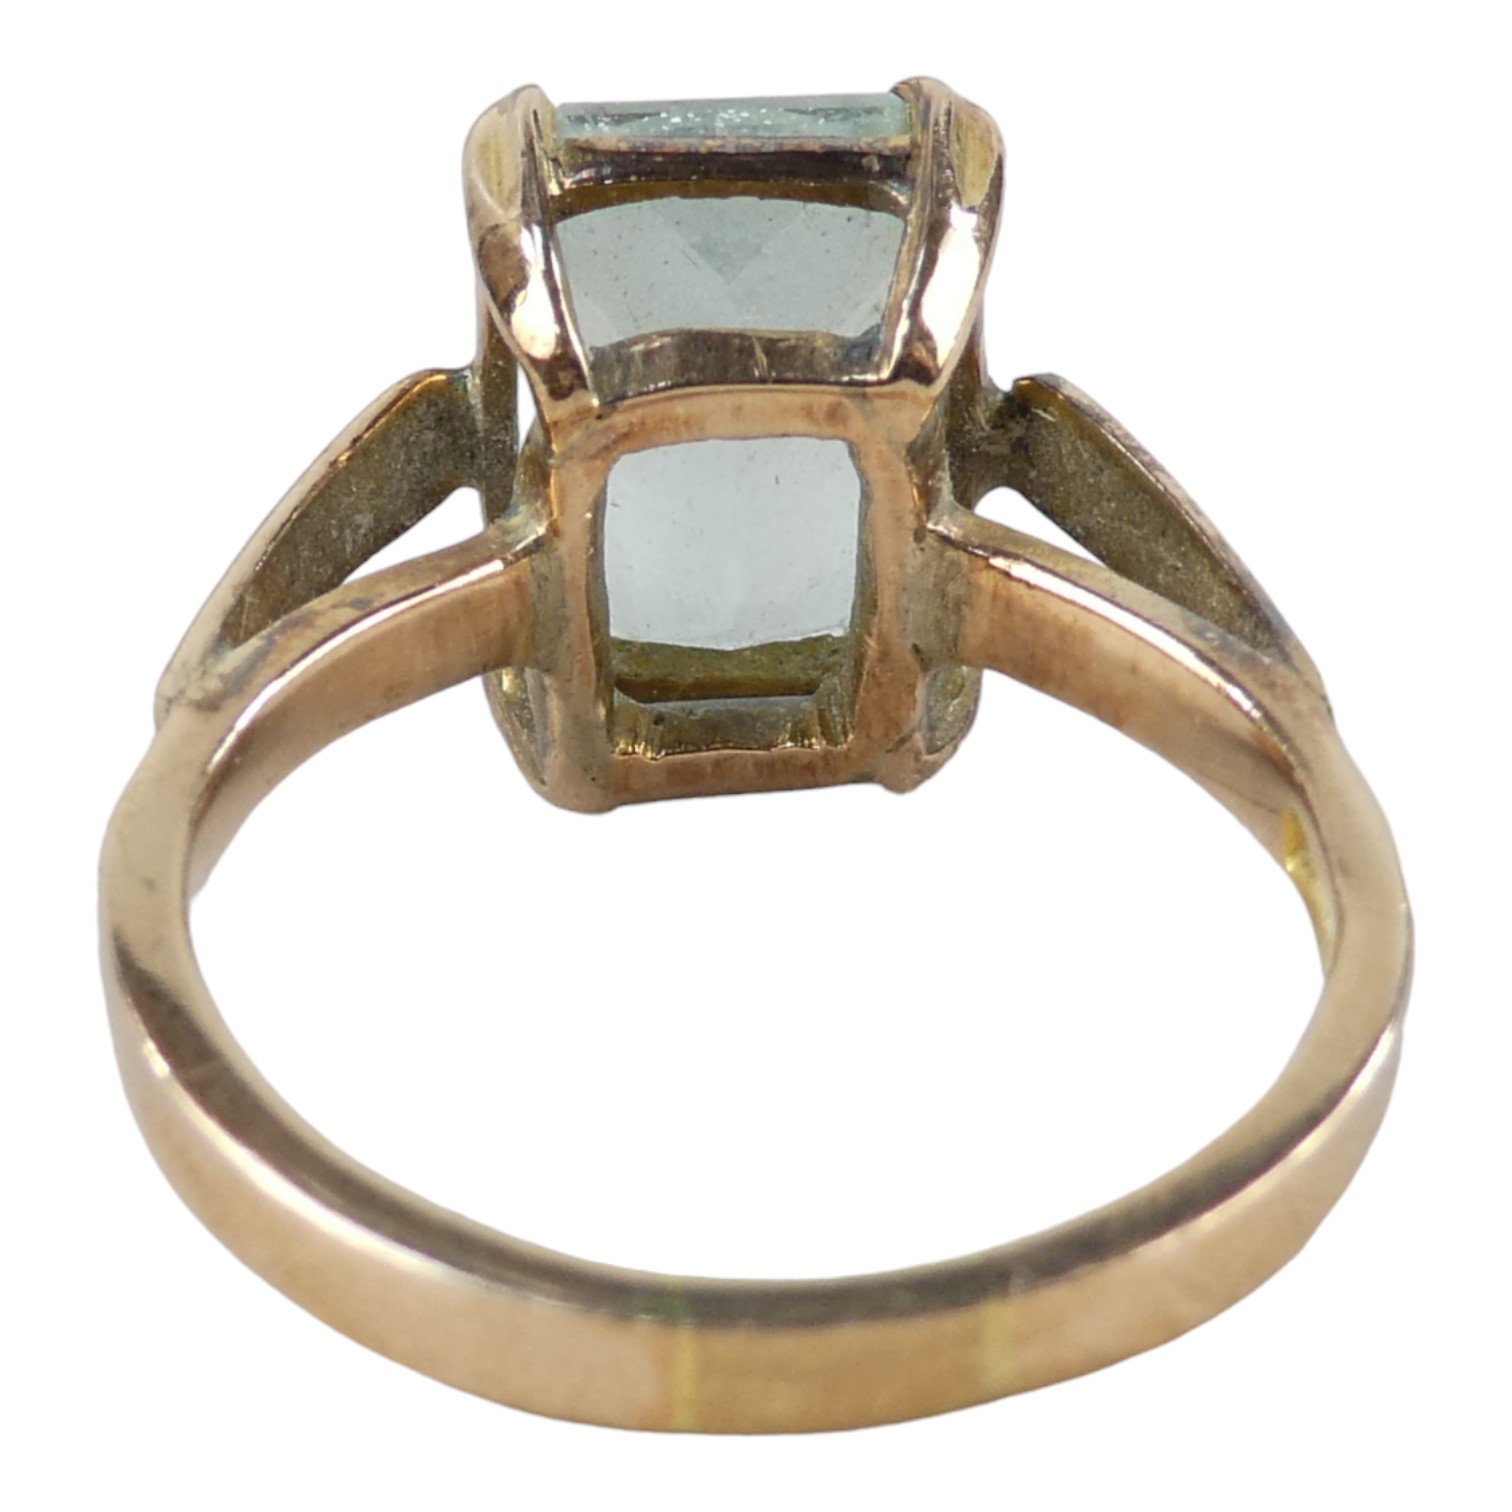 A 15ct gold ring - claw set with an emerald cut light blue stone, size O, weight 4.8g. - Image 4 of 4